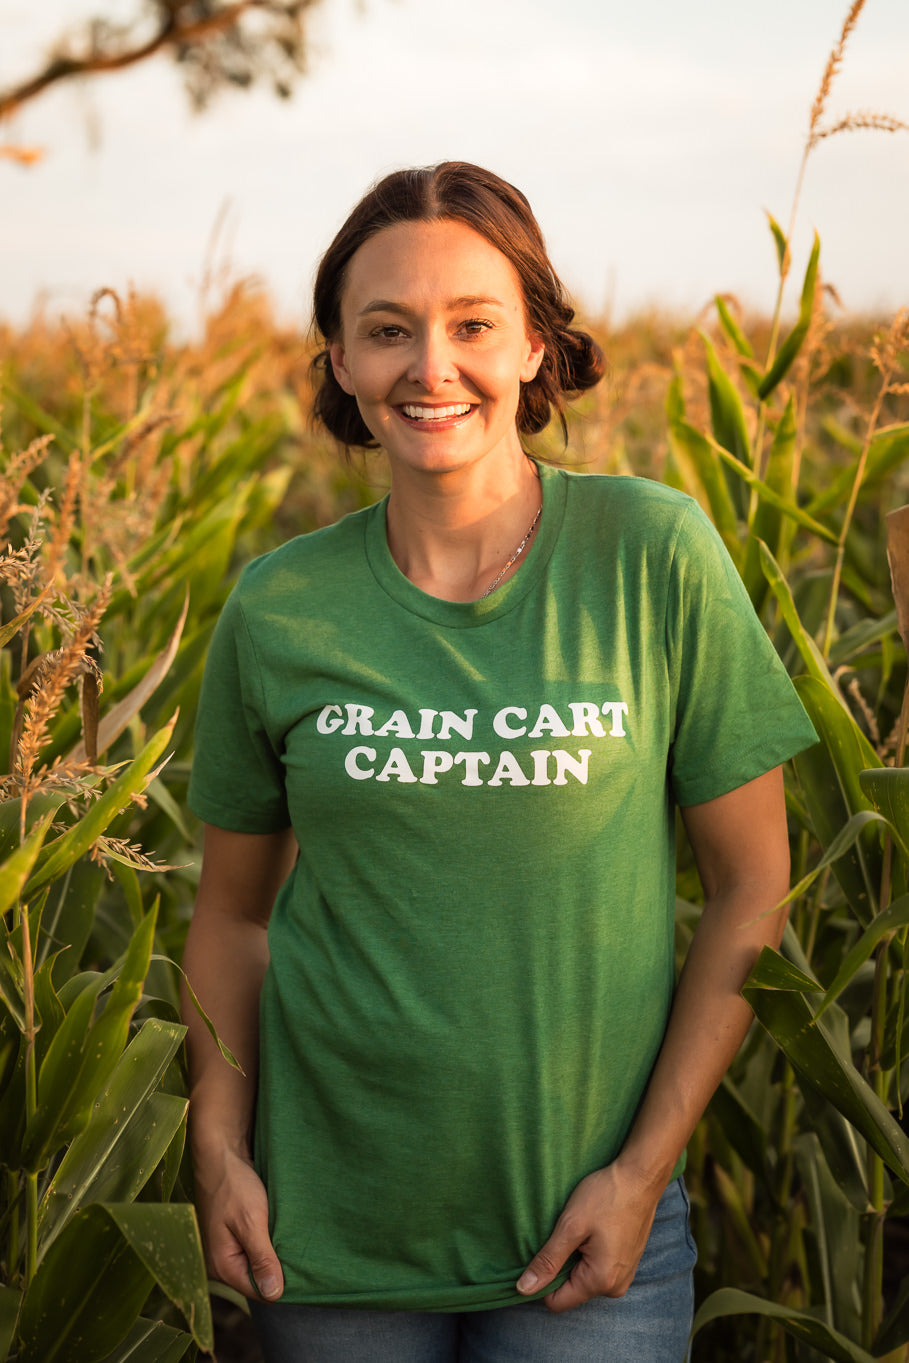 Grain Cart Captain Graphic Tee in Heather Grass Green | Sizes S - 3XL - Rosebud's Tees